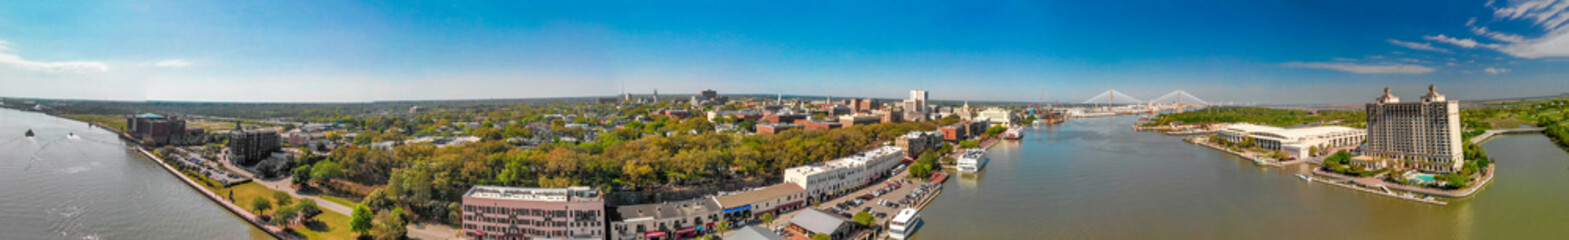 Panoramic aerial view of Savannah skyline and river from drone - Georgia - USA